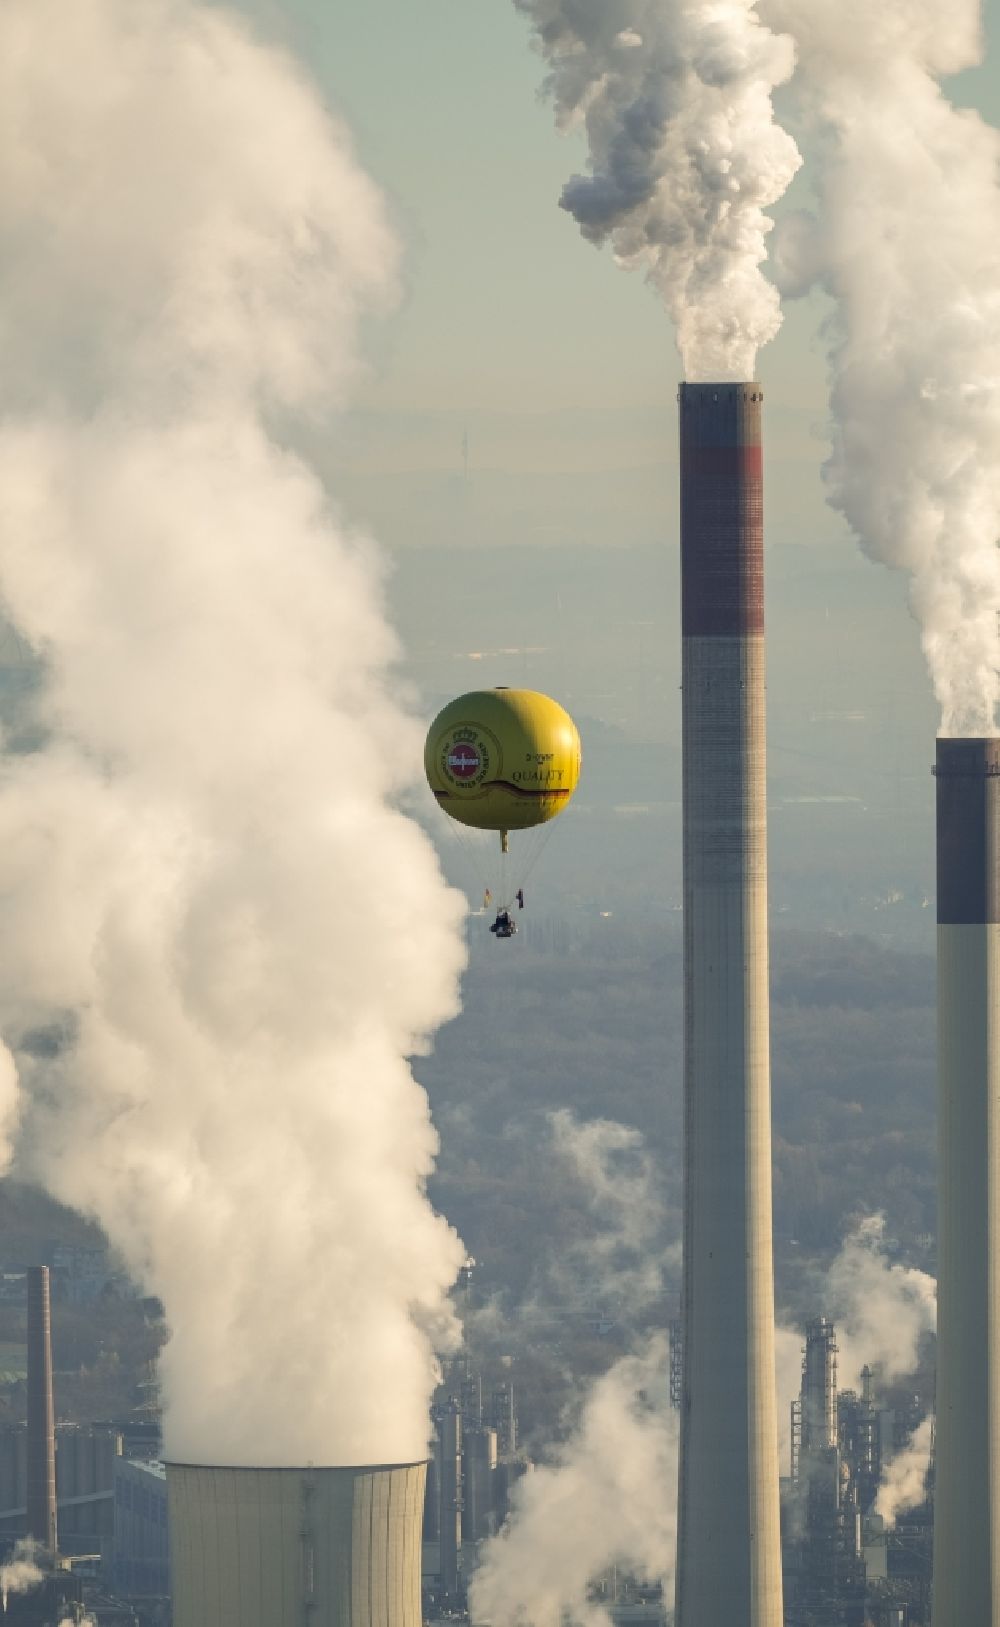 Aerial image Gelsenkirchen - Yellow hot air balloon with the identification D-OWNT in front of the exhaust gas clouds of the power plants and exhaust towers of thermal power station of Uniper Kraftwerke GmbH in the district Gelsenkirchen-Nord in Gelsenkirchen in the state North Rhine-Westphalia